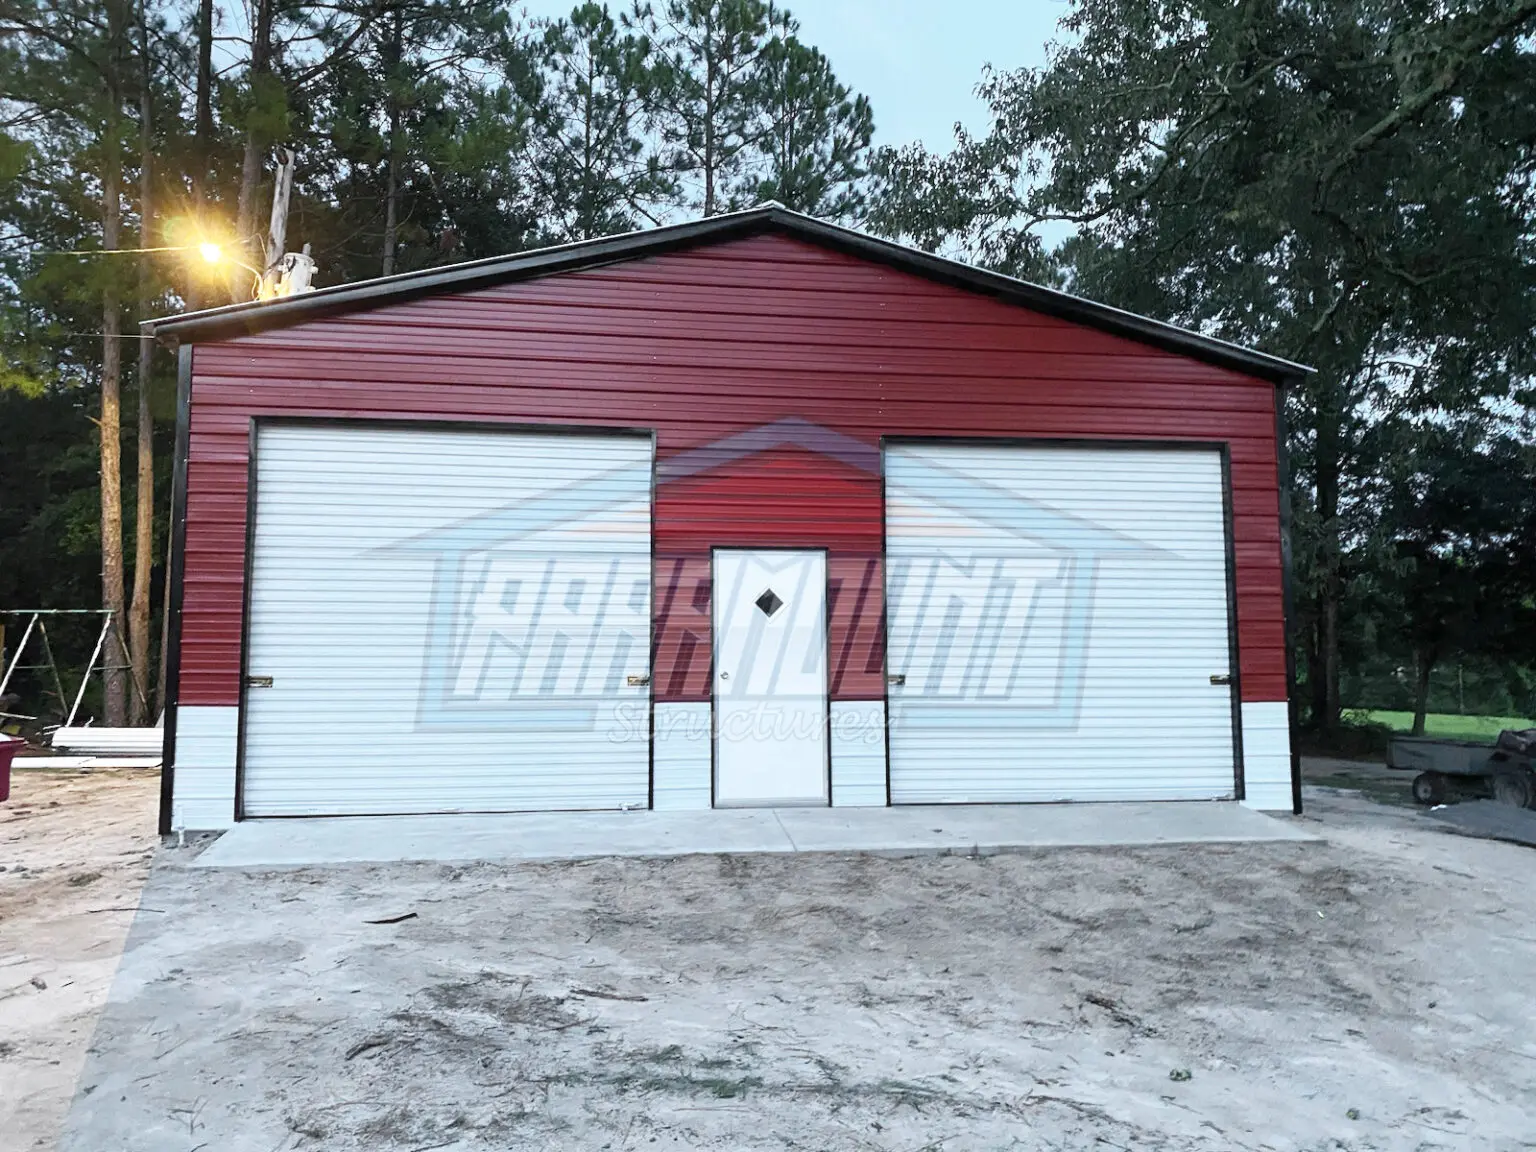 A metal building with two garage doors and a single door.